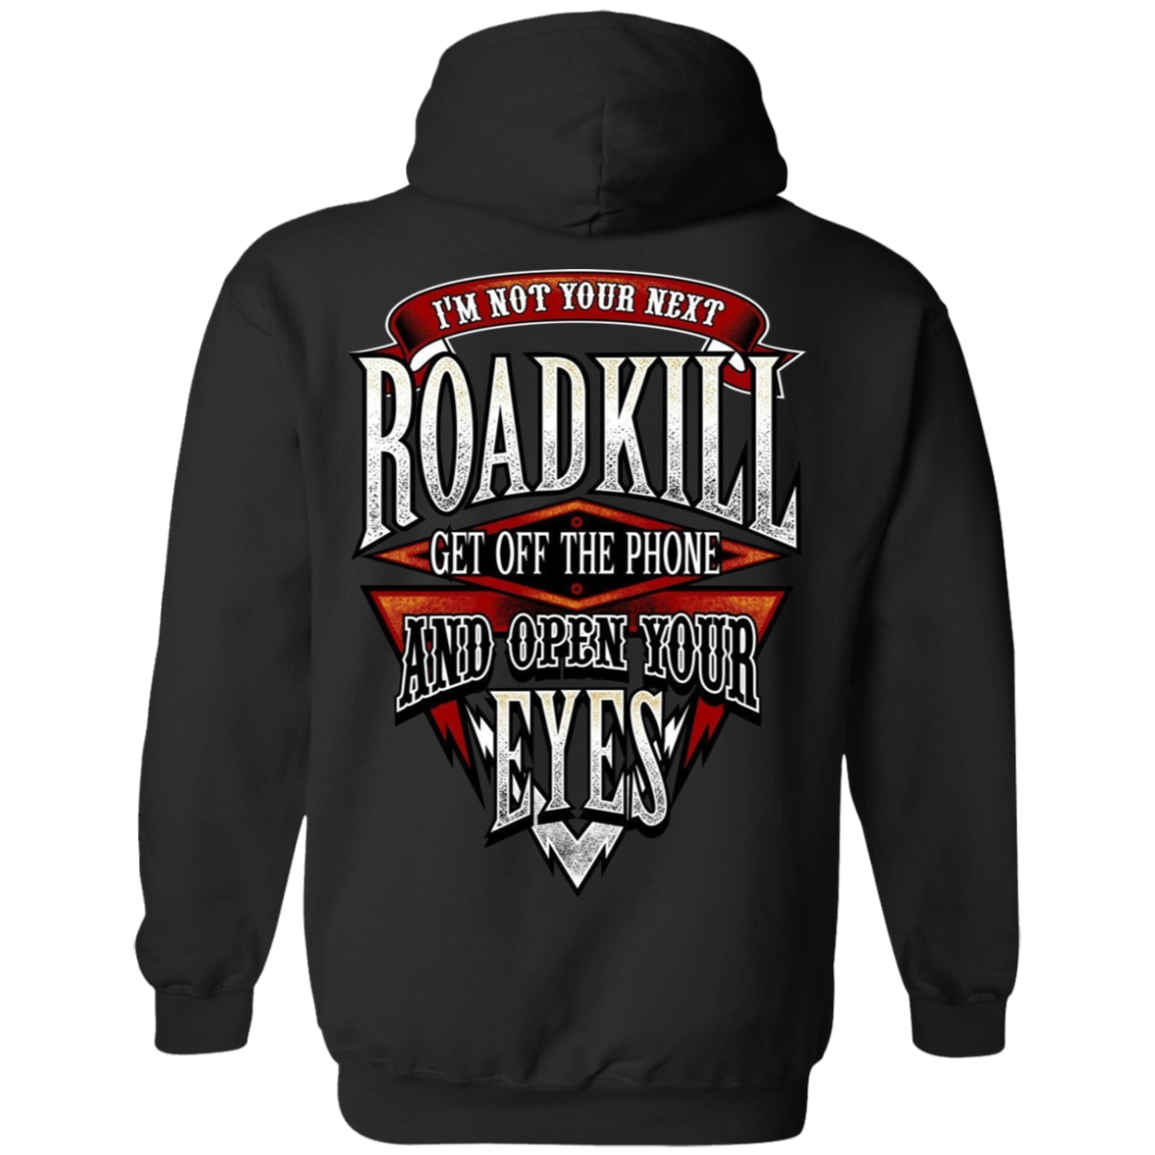 I'm Not Your Next Roadkill Get Off The Phone And Open Your Eyes Hoodie ...